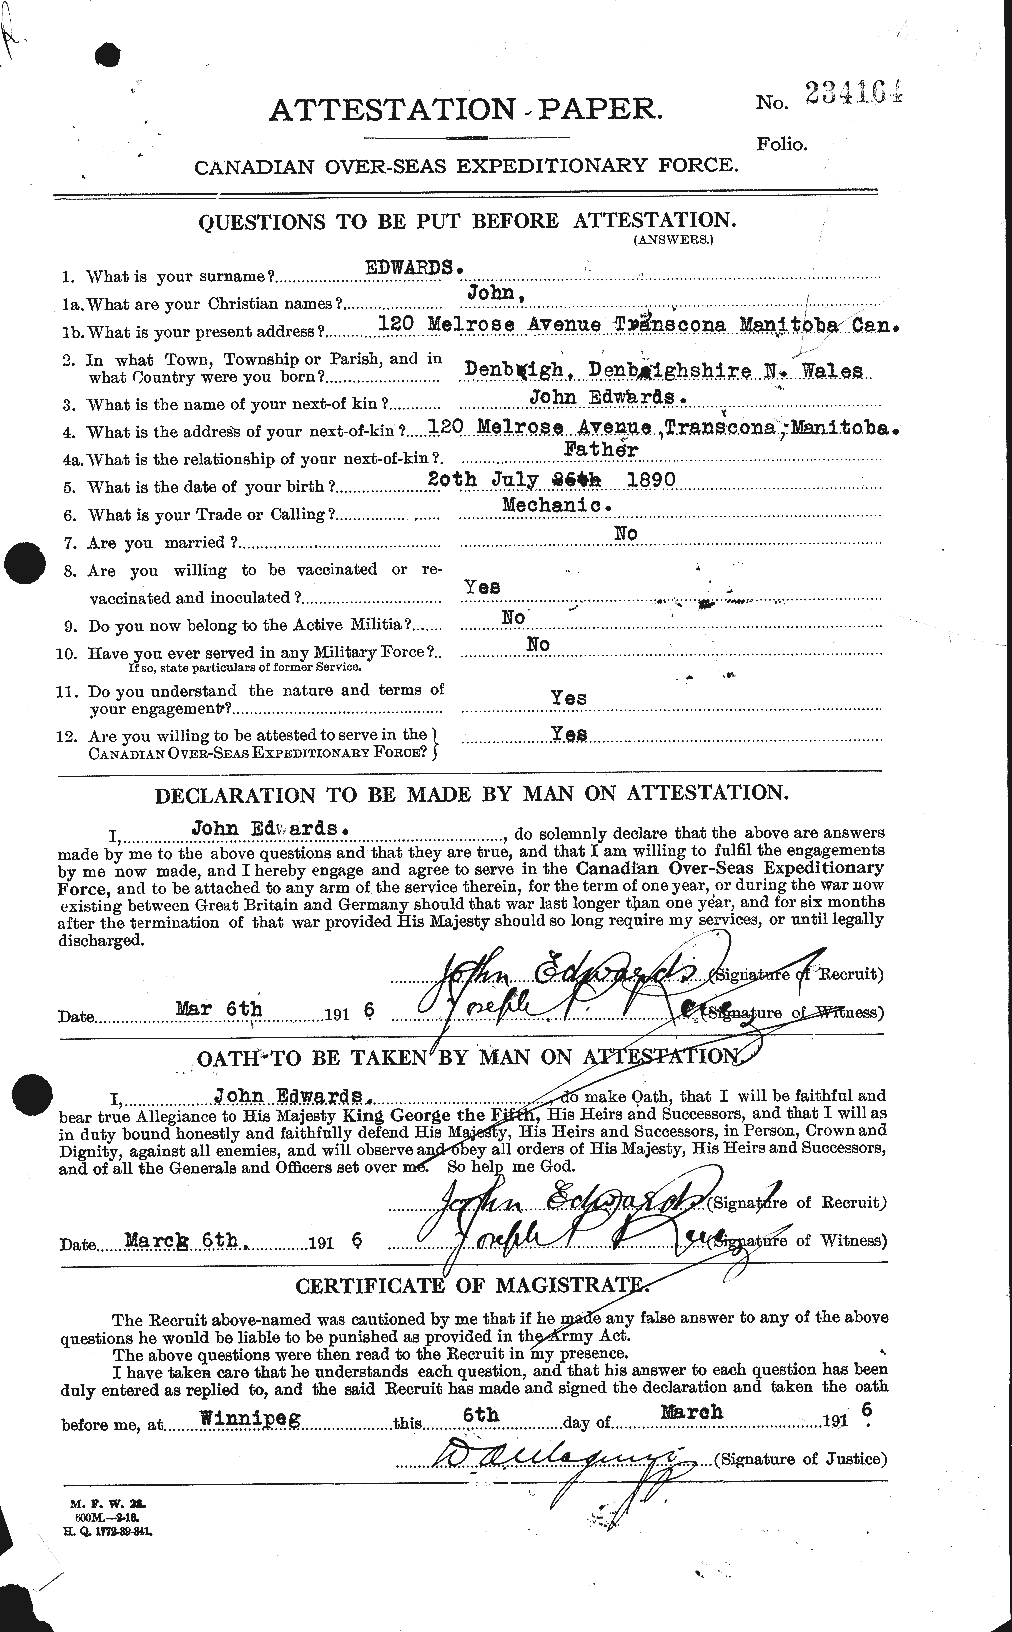 Personnel Records of the First World War - CEF 309836a